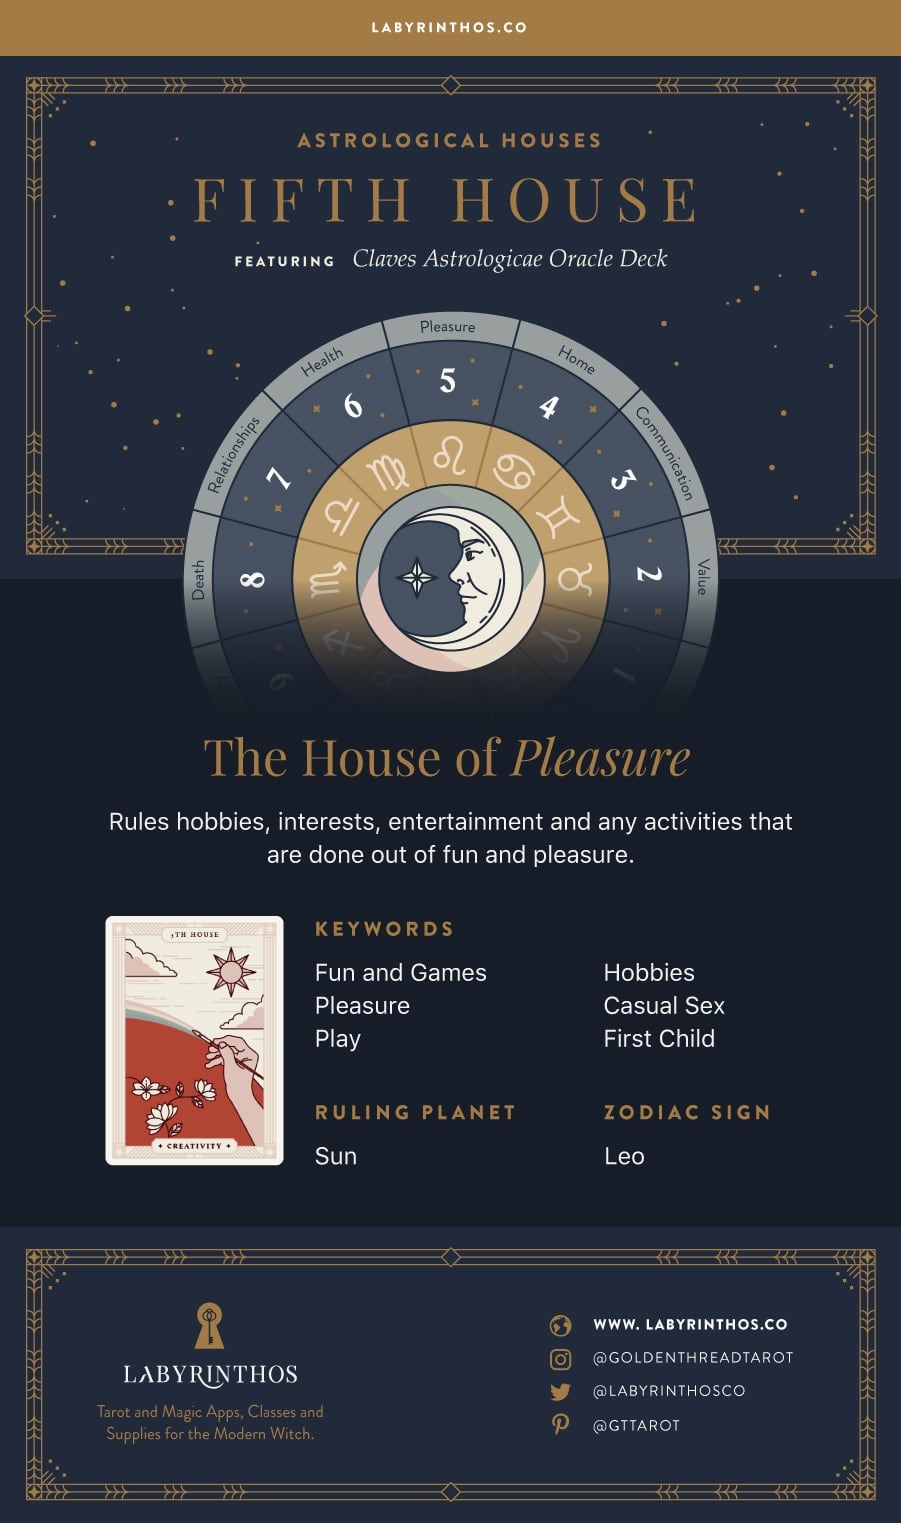 The Fifth House: The House of Pleasure - the 12 Houses of Astrology Infographic